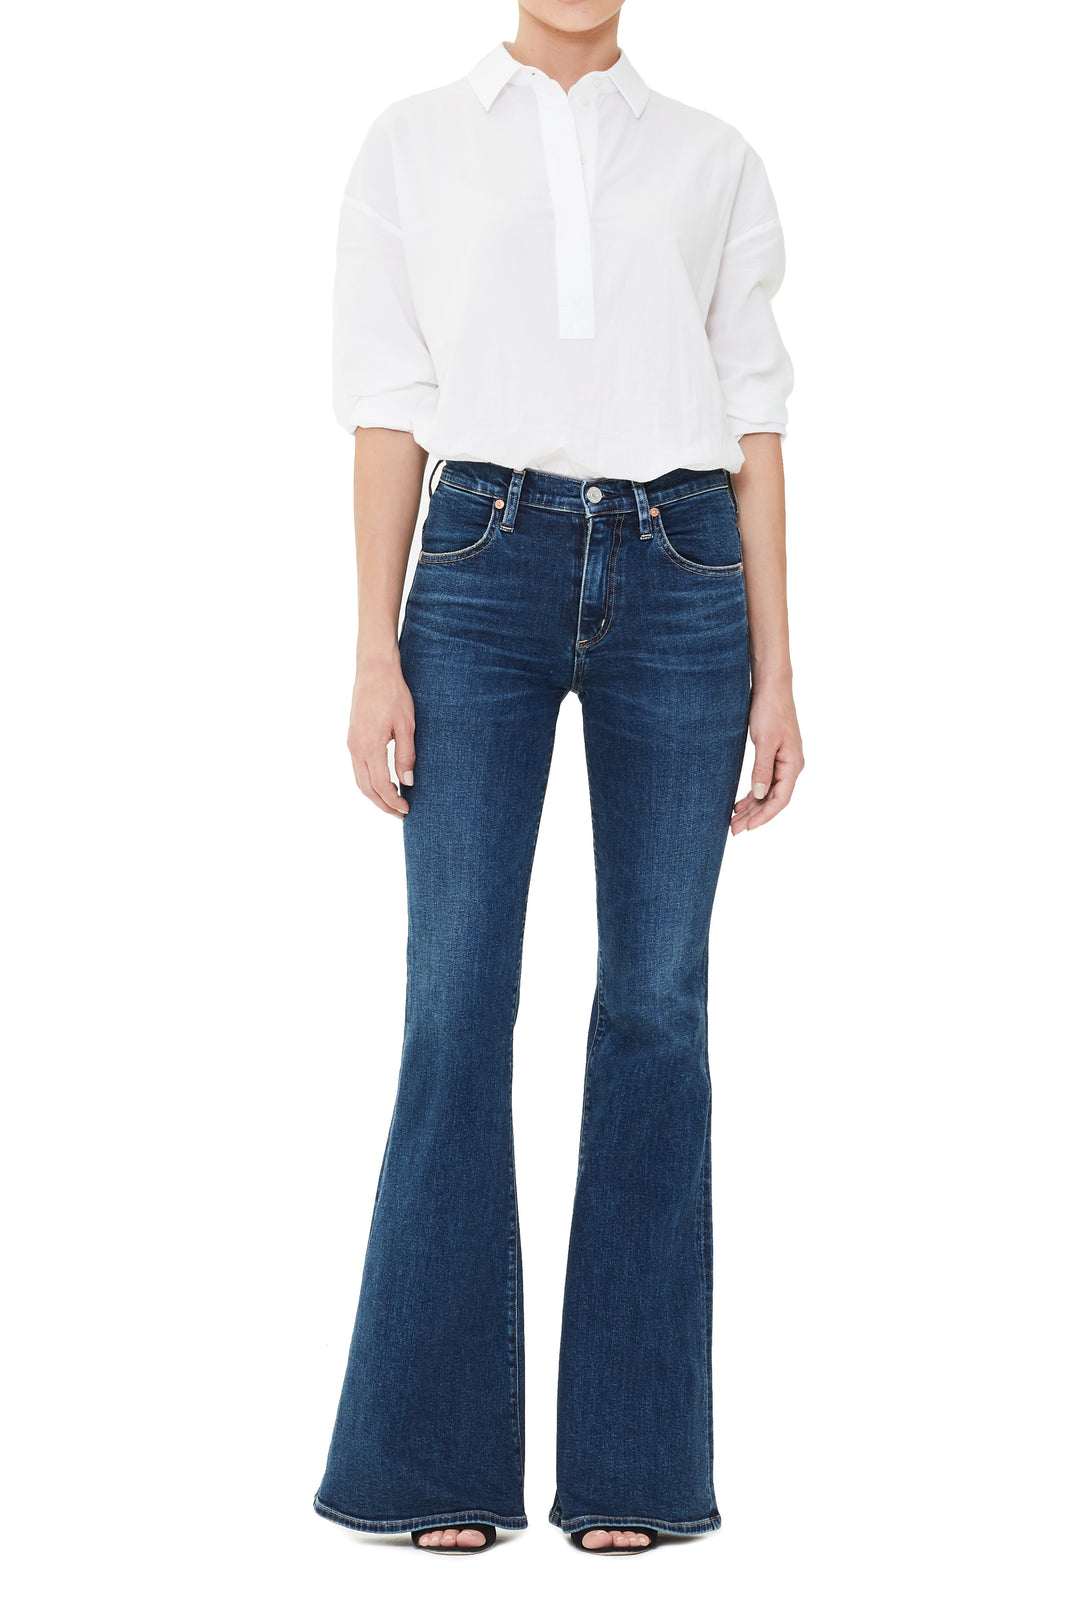 Citizens of Humanity- Chloe Mid Rise Super Flare Jeans in Dedication Wash